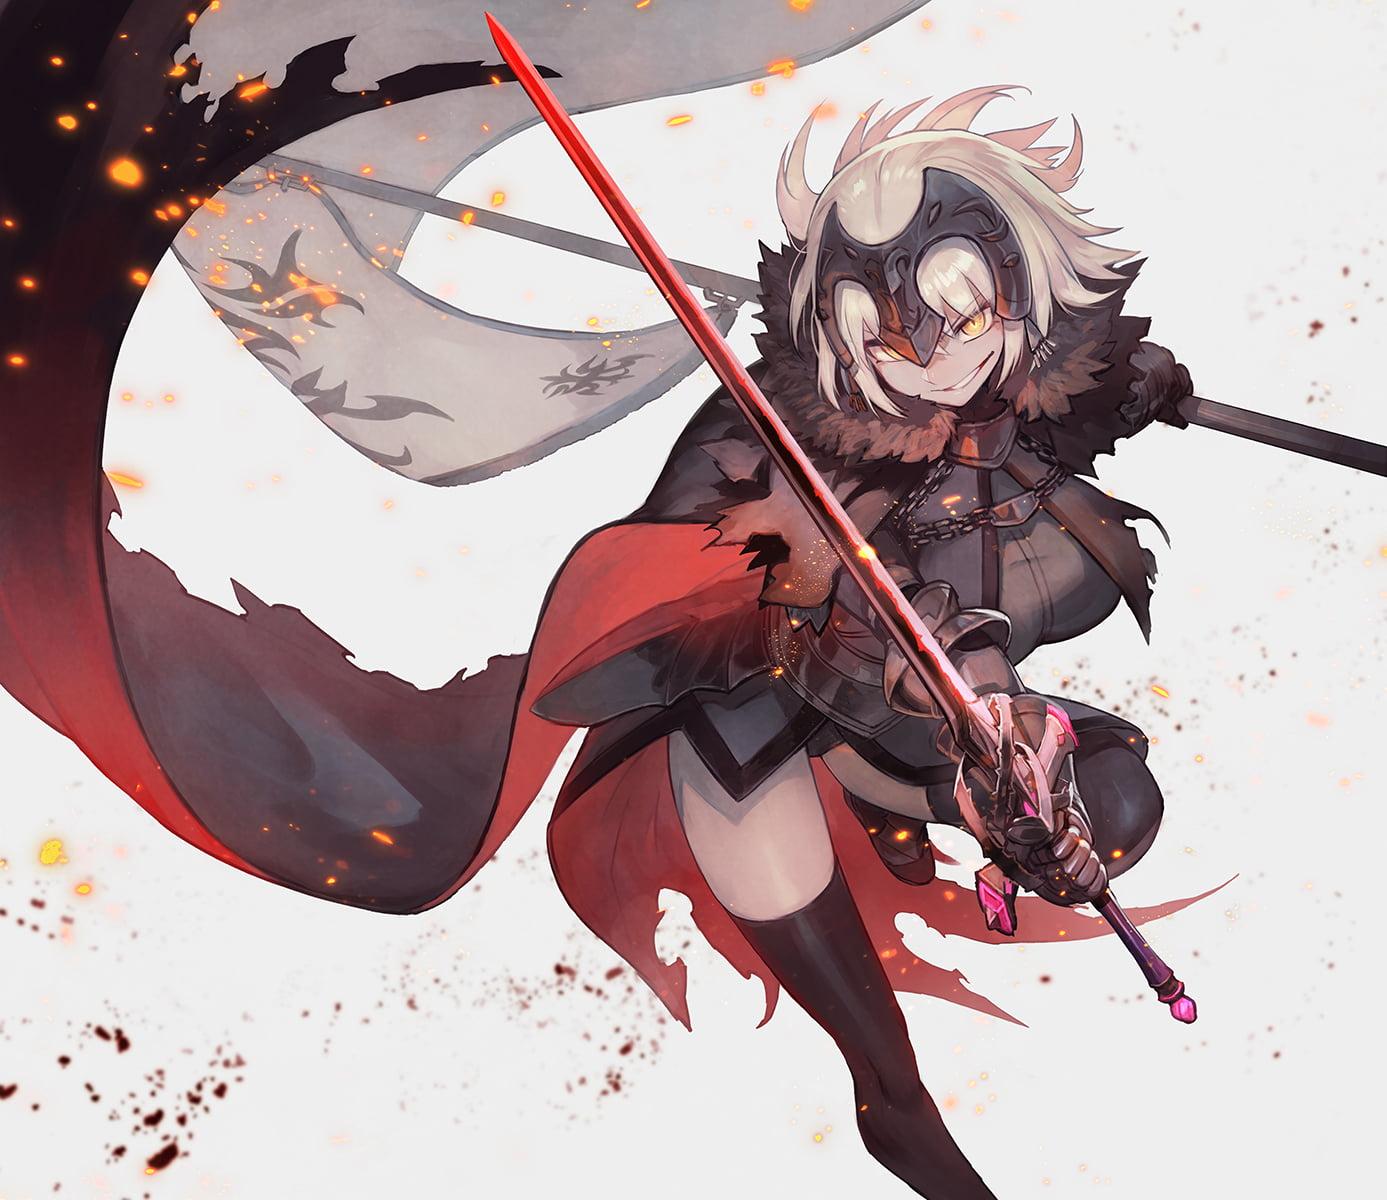 Man Holding Sword Animated Painting, Fate Grand Order